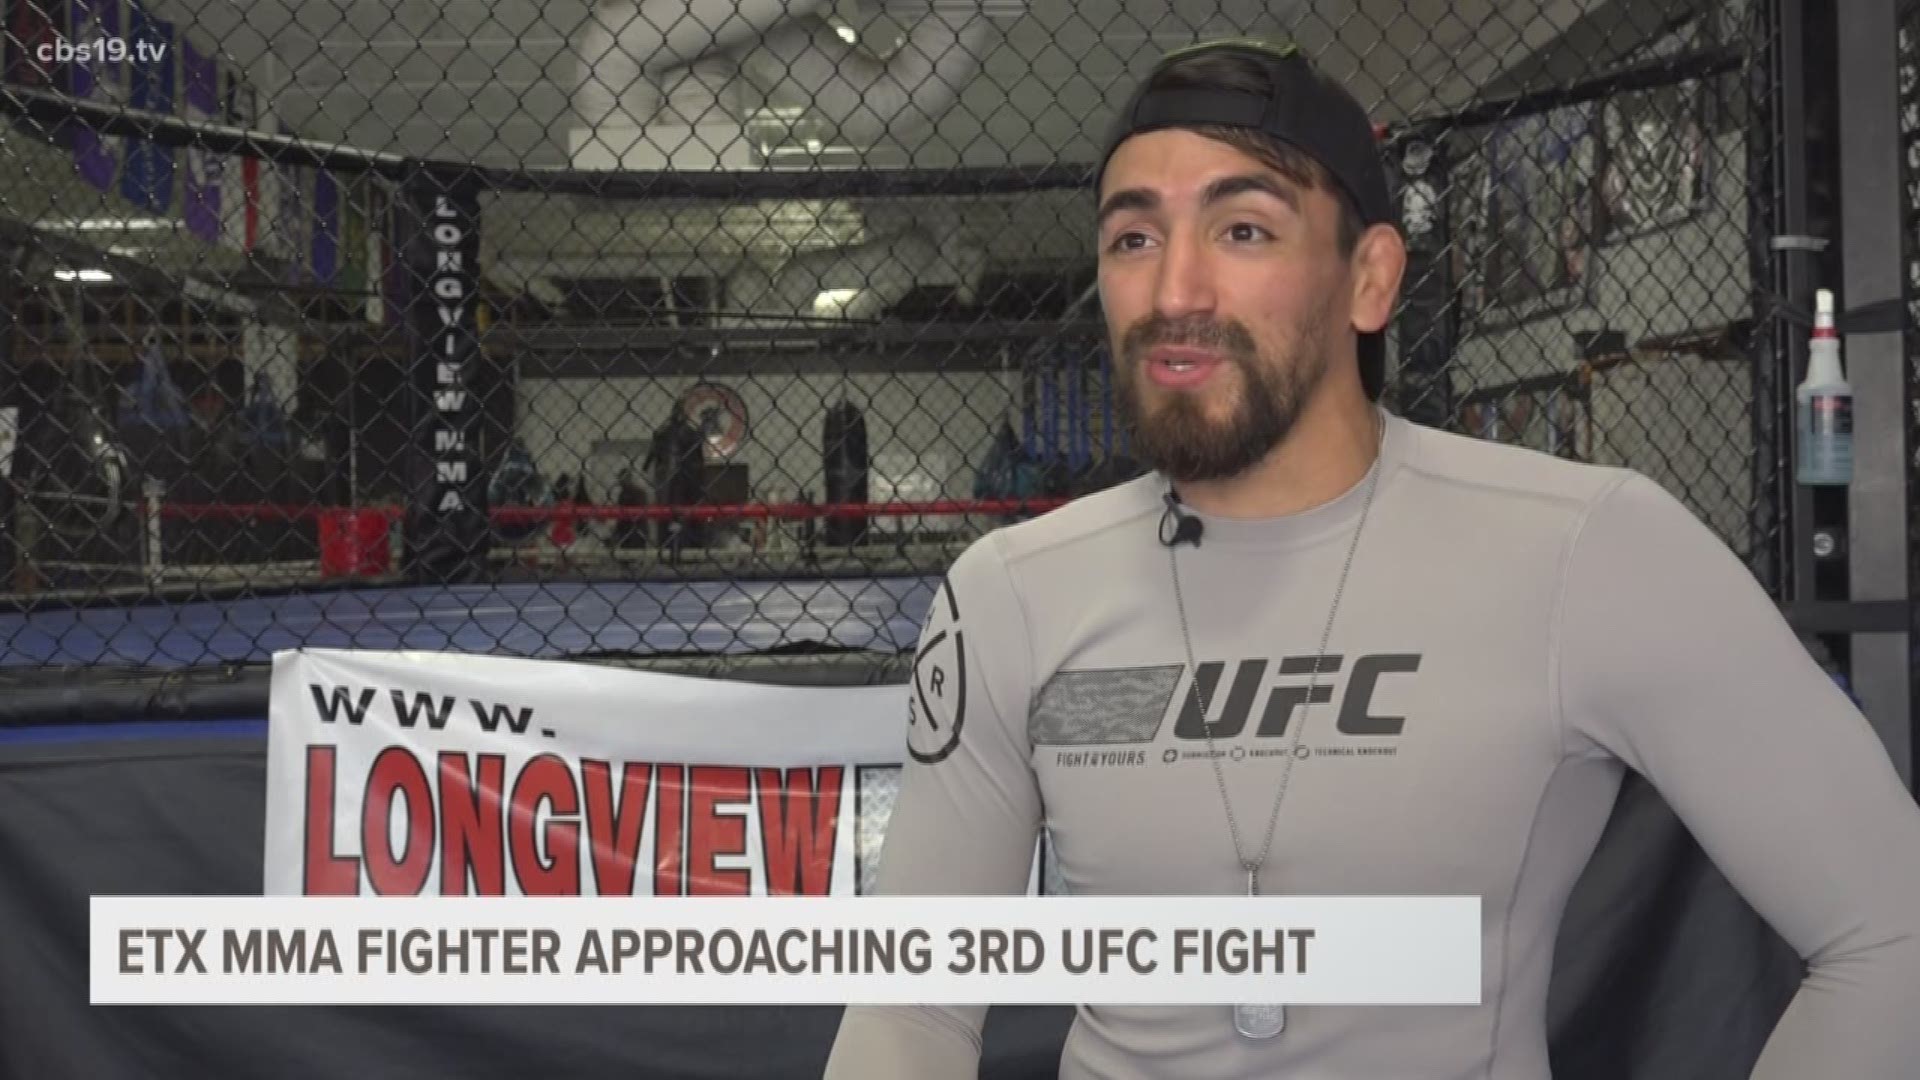 Work, train, sleep, repeat. That’s the every day routine of Longview MMA fighter Kevin Aguilar, who will be entering the UFC octagon for the third time next Saturday.